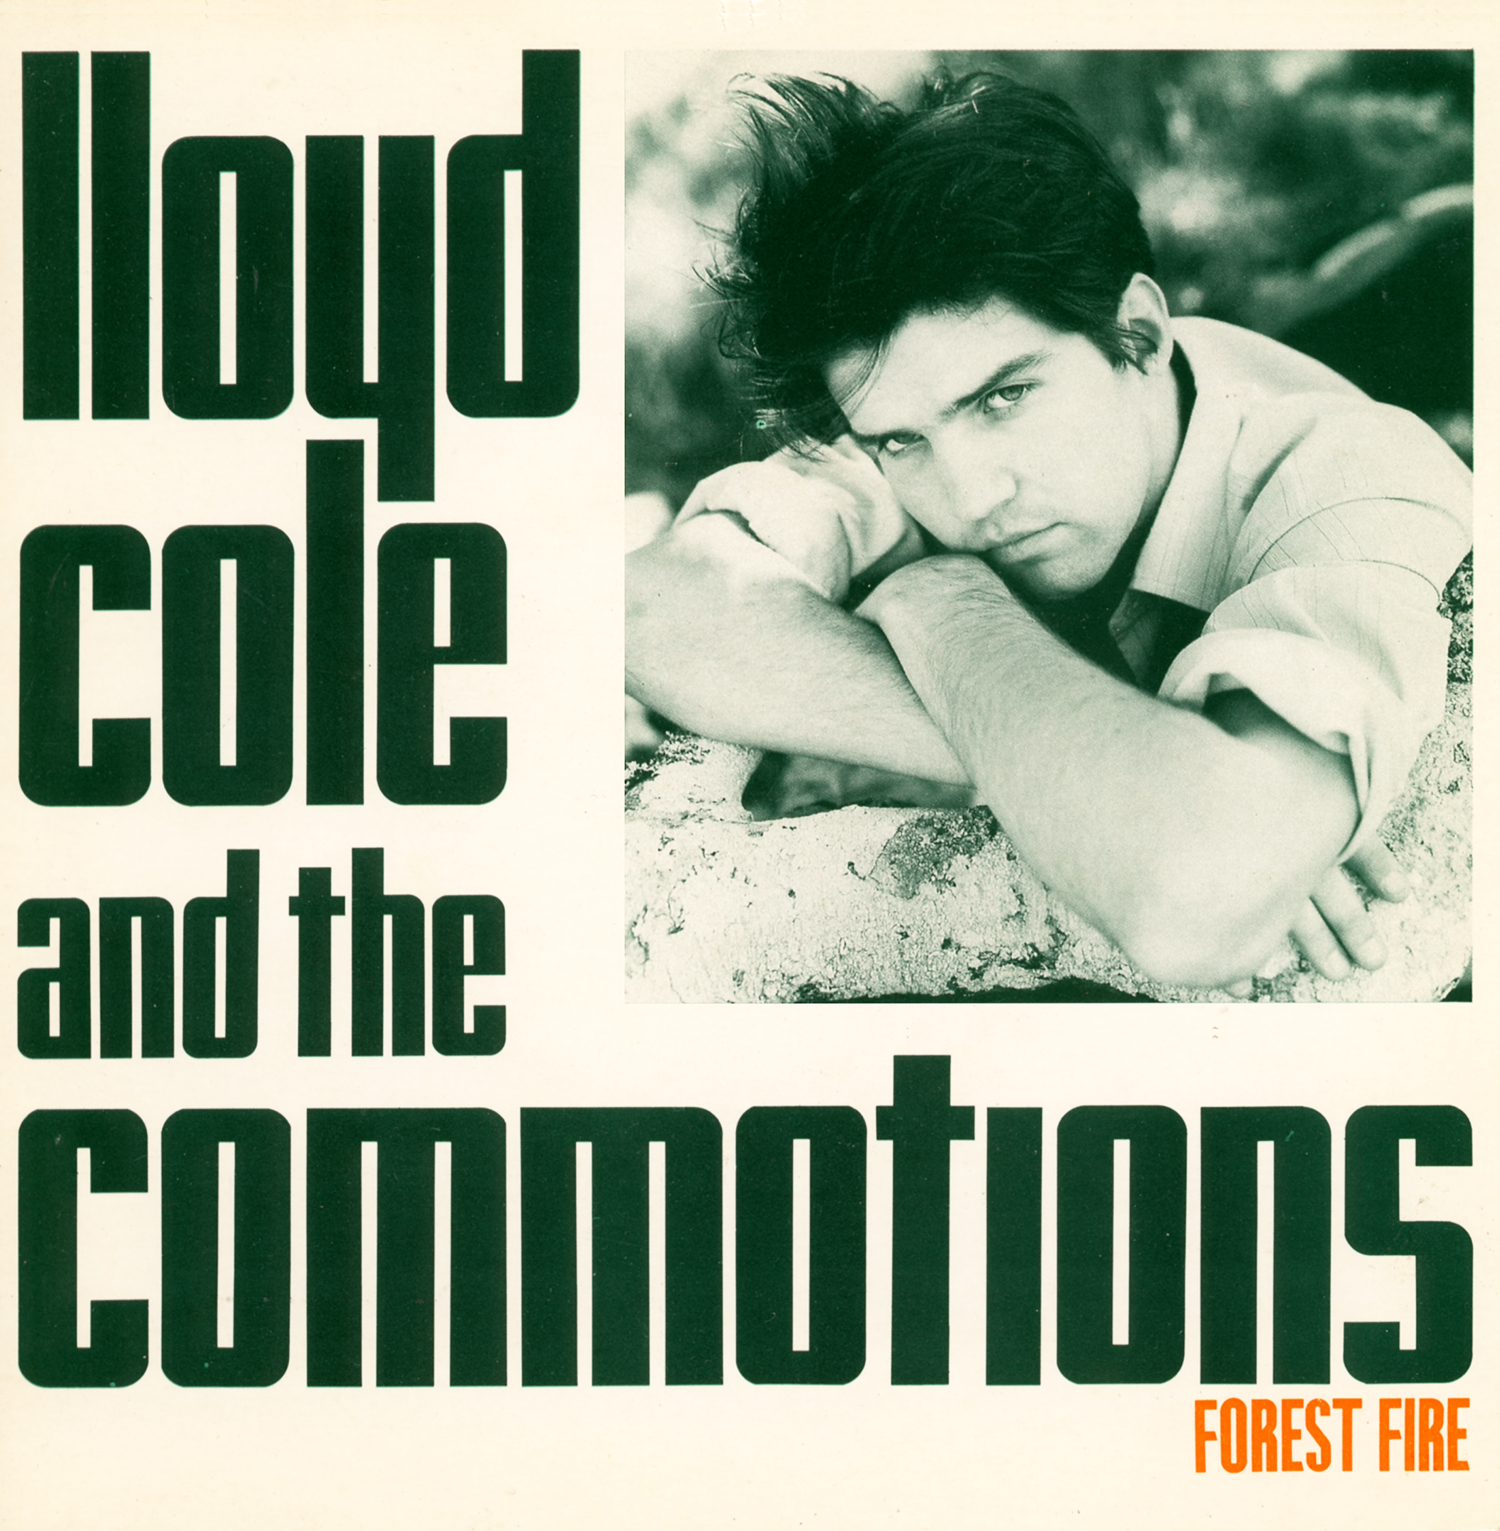 forest fire _ lloyd cole and the commotions